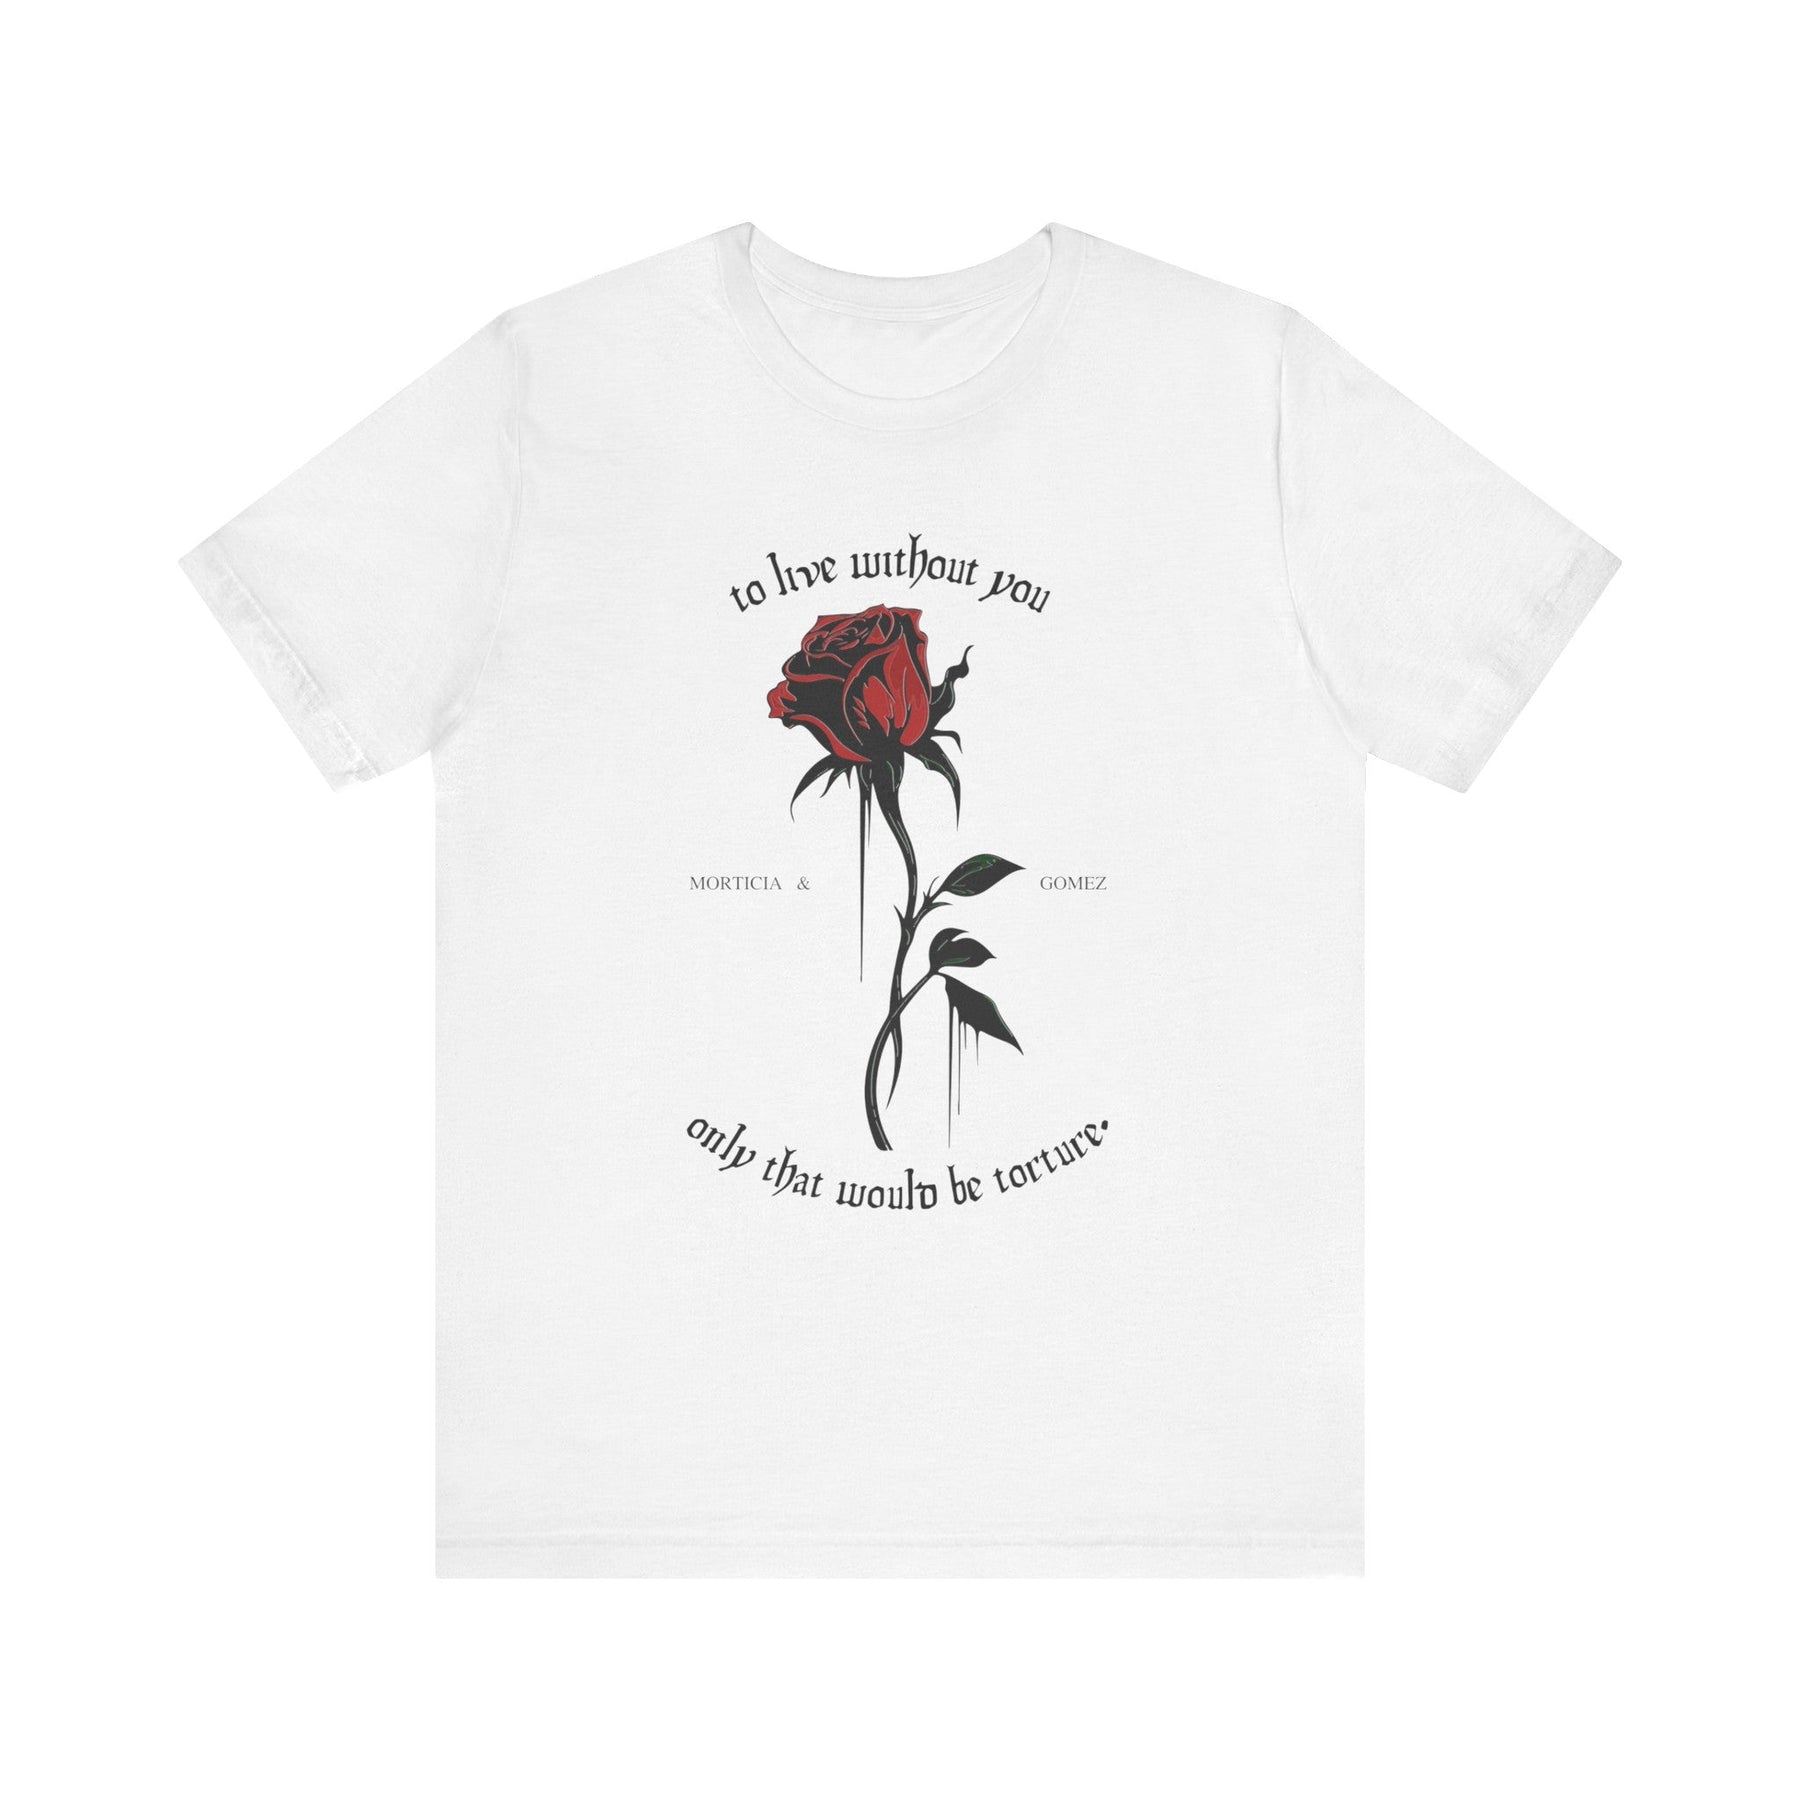 Morticia & Gomez 'To Live Without You' Gothic Rose Tee - Goth Cloth Co.T - Shirt22403495768044275716